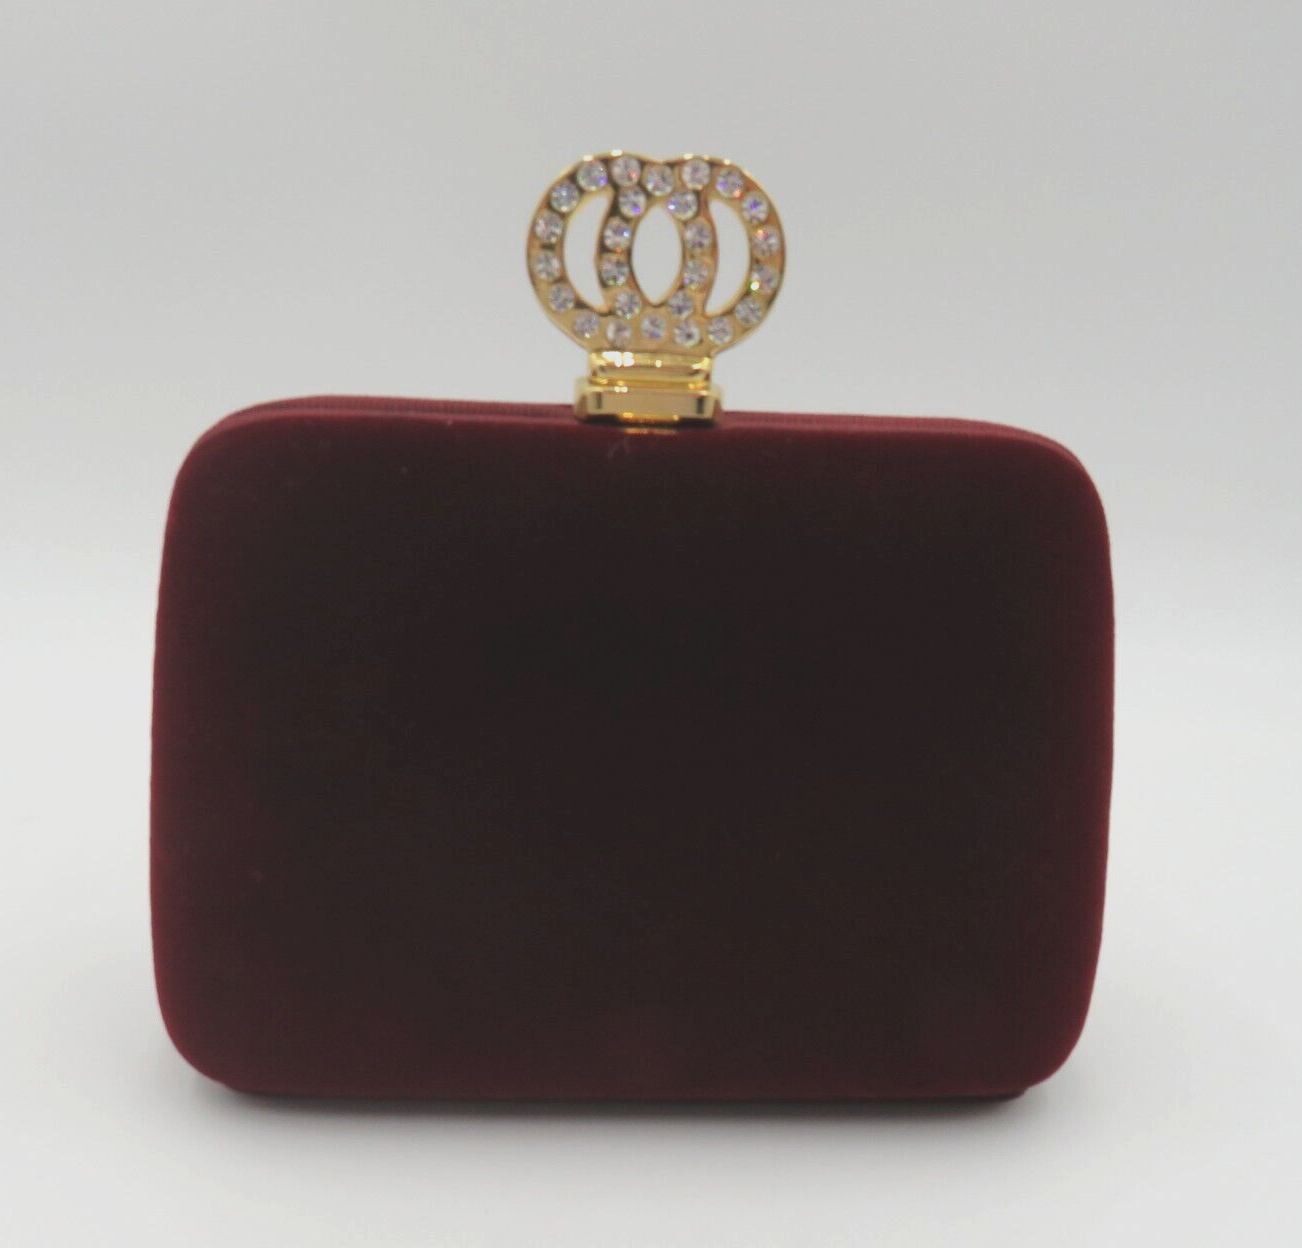 Primary image for Burgundy Velvet Purse Clutch Rhinestone Gold Tone Clasp Removable Chain Strap